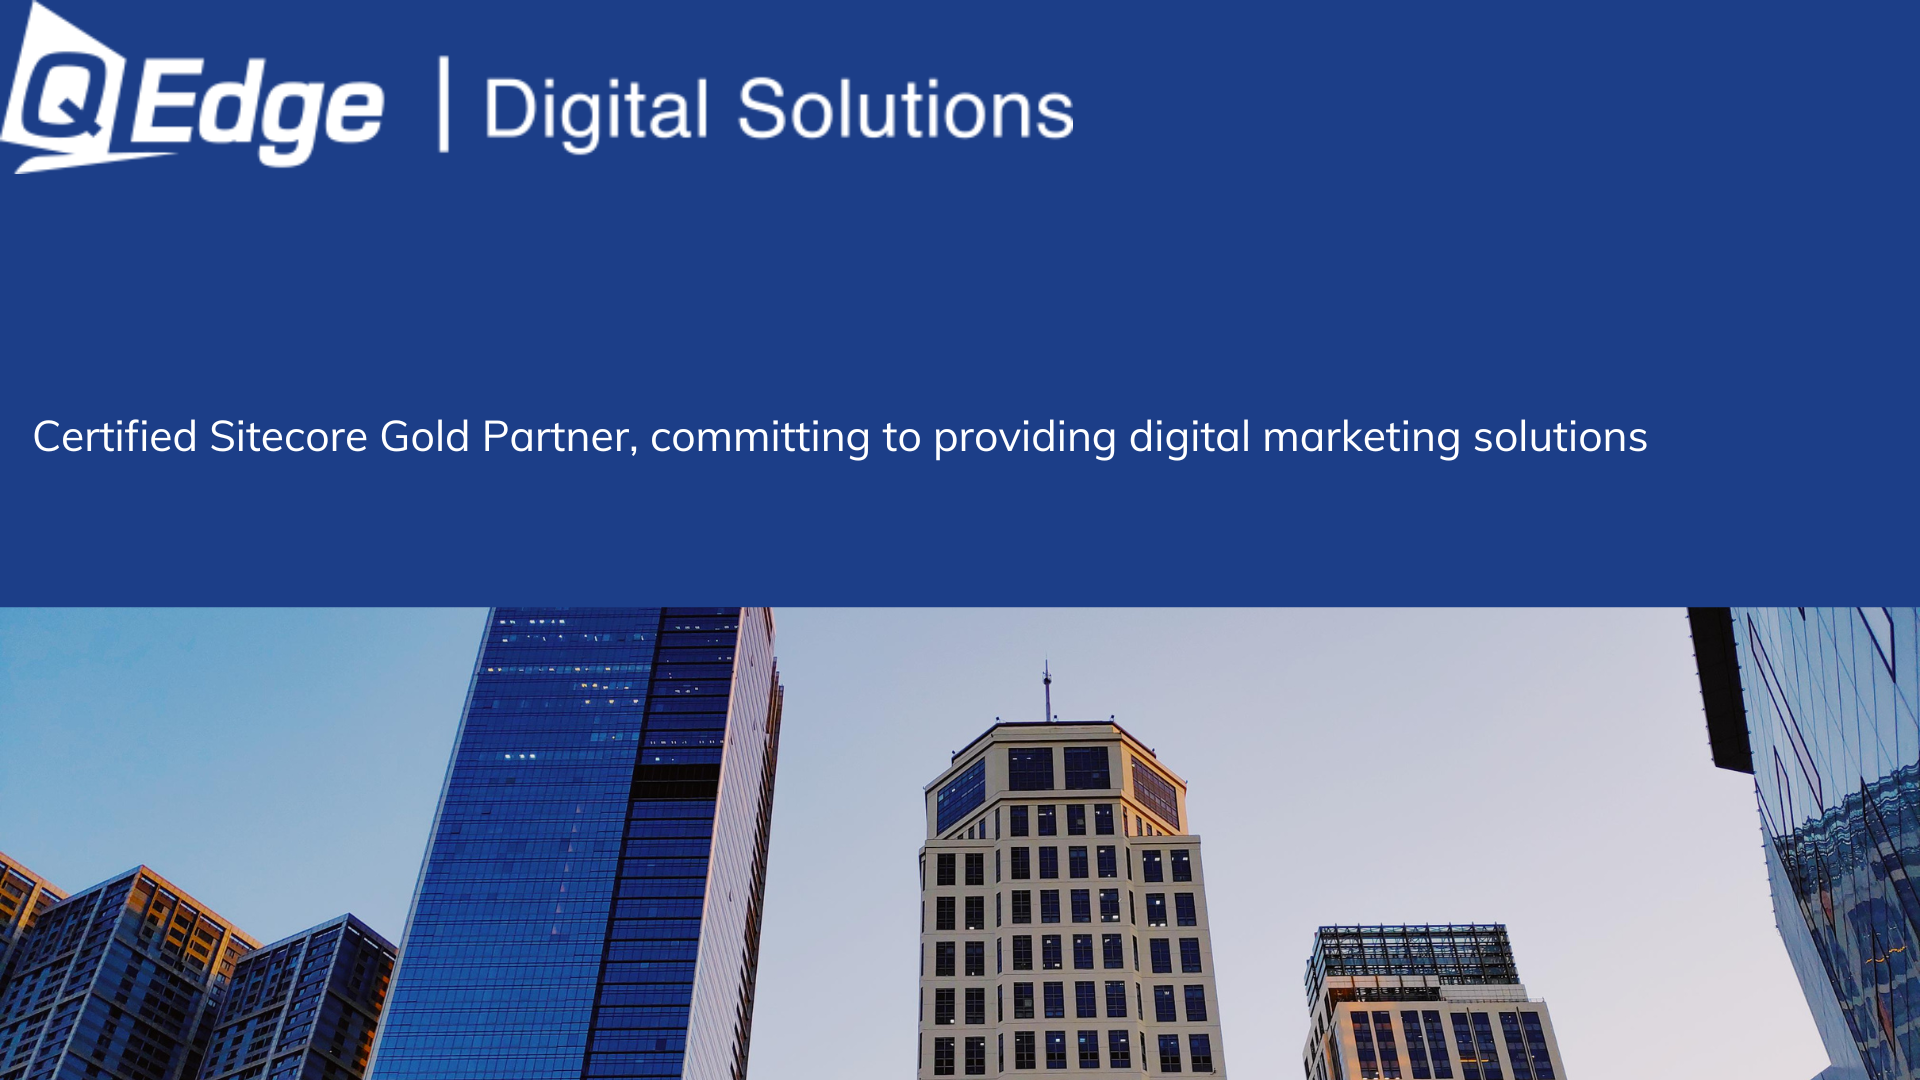 QEdge Digital Solutions is committed to provide Sitecore digital marketing solutions
